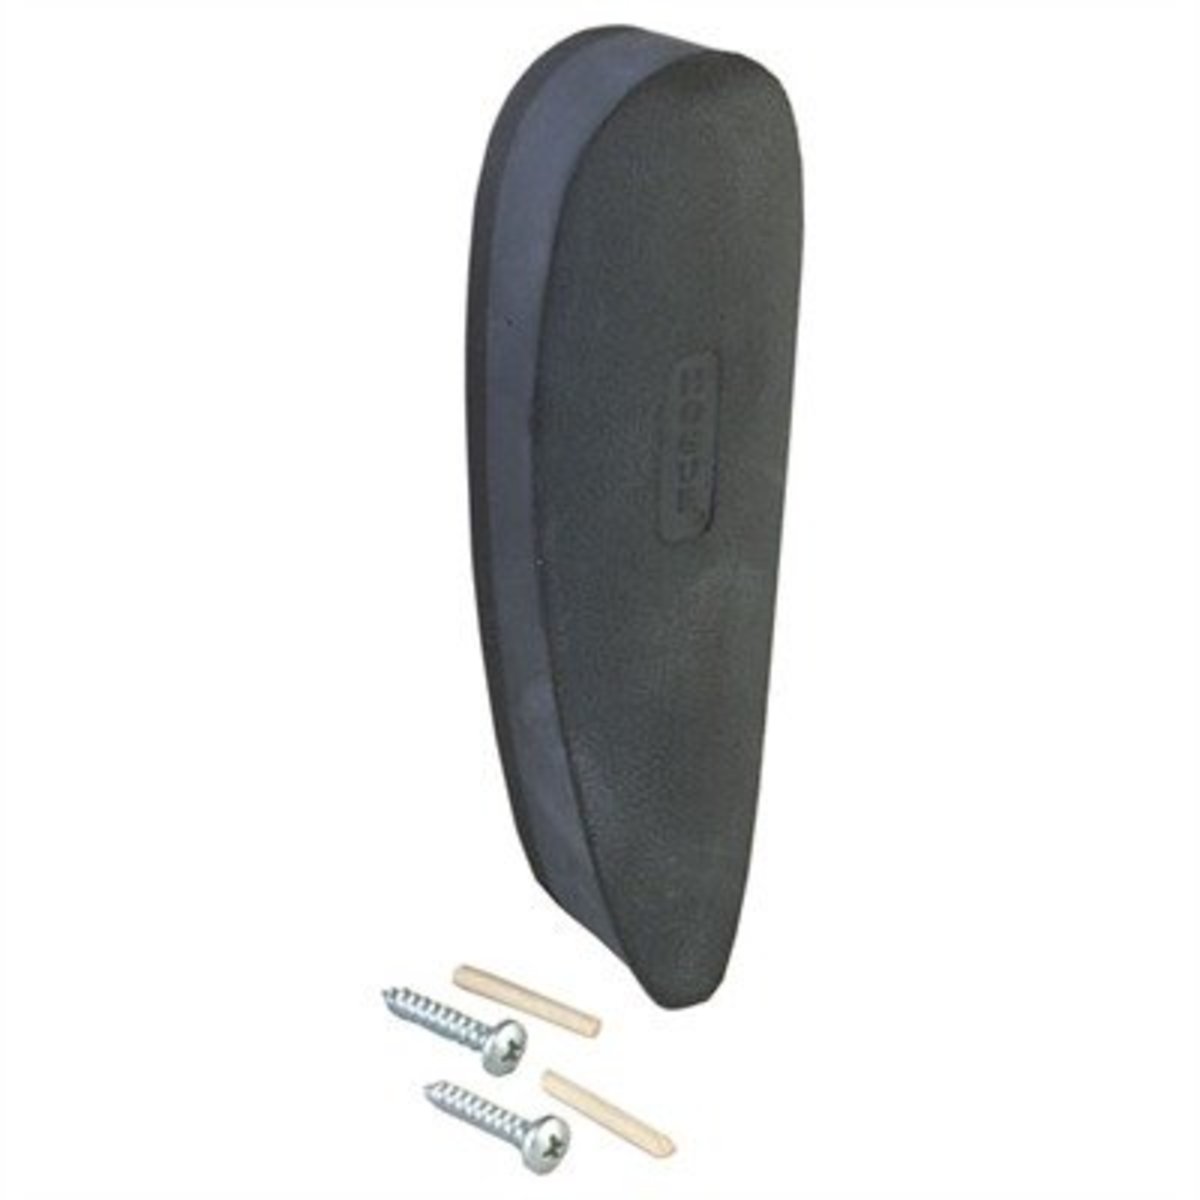 A Synthetic Rubber Pad For a Shotgun